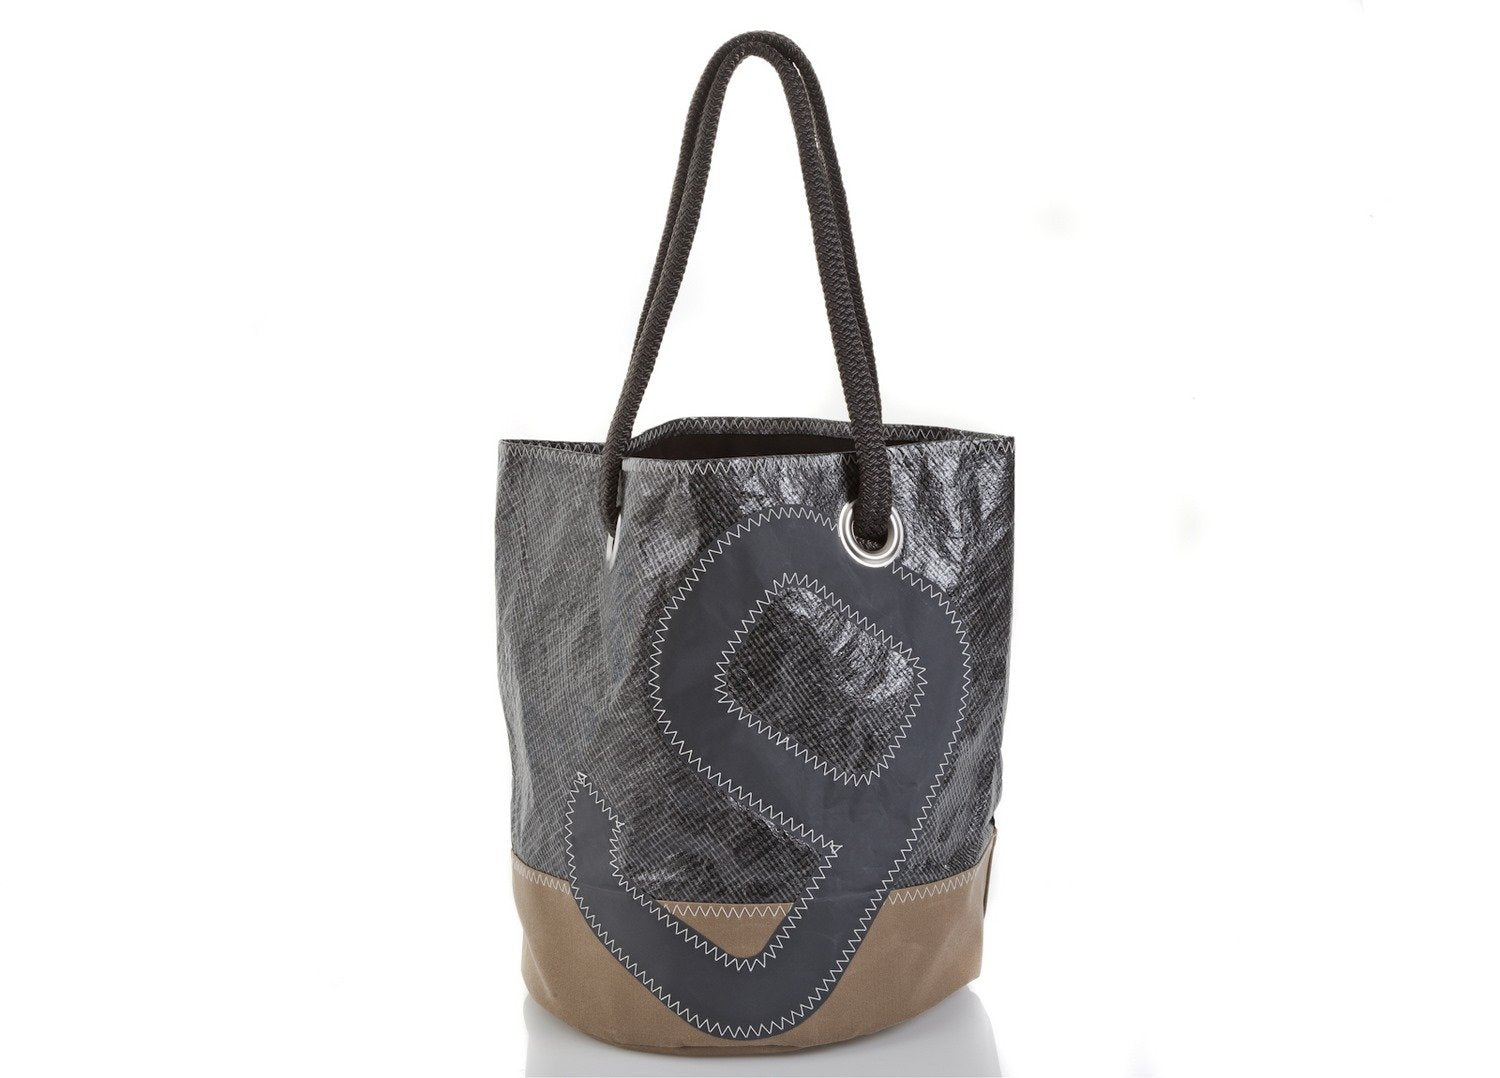 Sports Bag "Diego" in Recycled Sail Gennaker